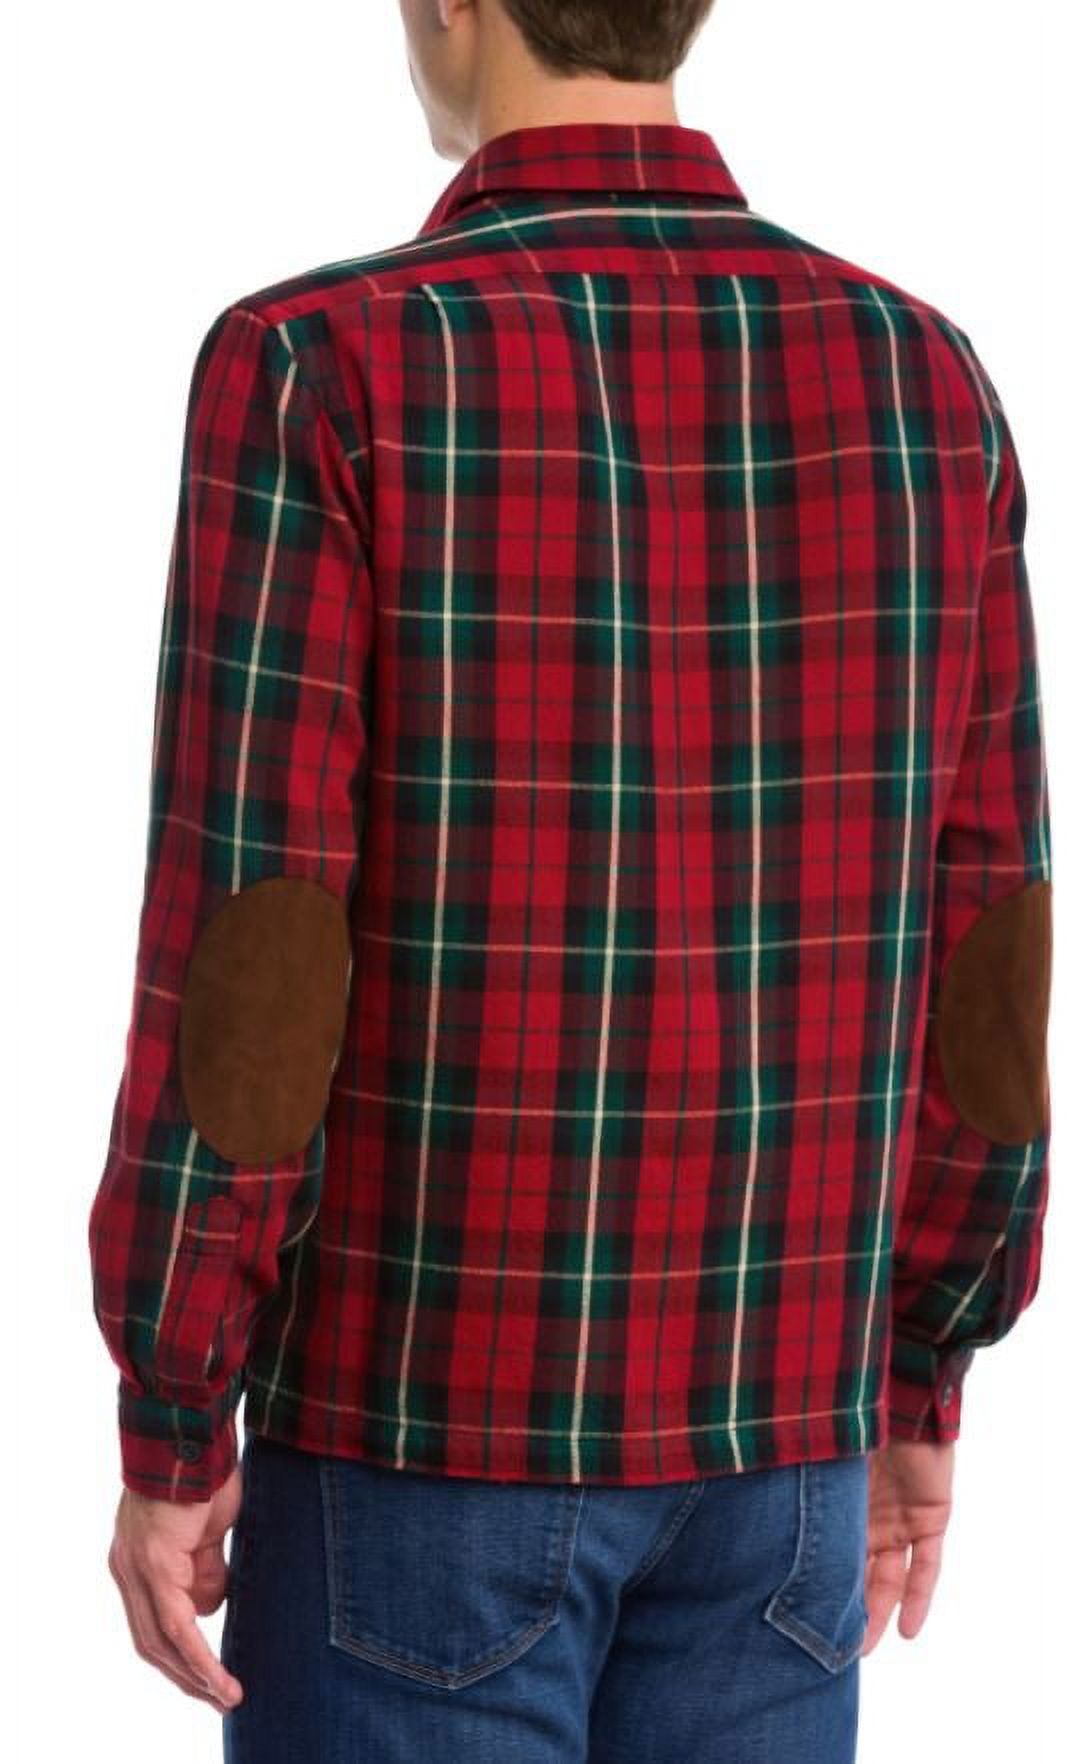 Polo Ralph Lauren Men's Red Classic Fit Plaid Twill Shirt, Large - image 5 of 6